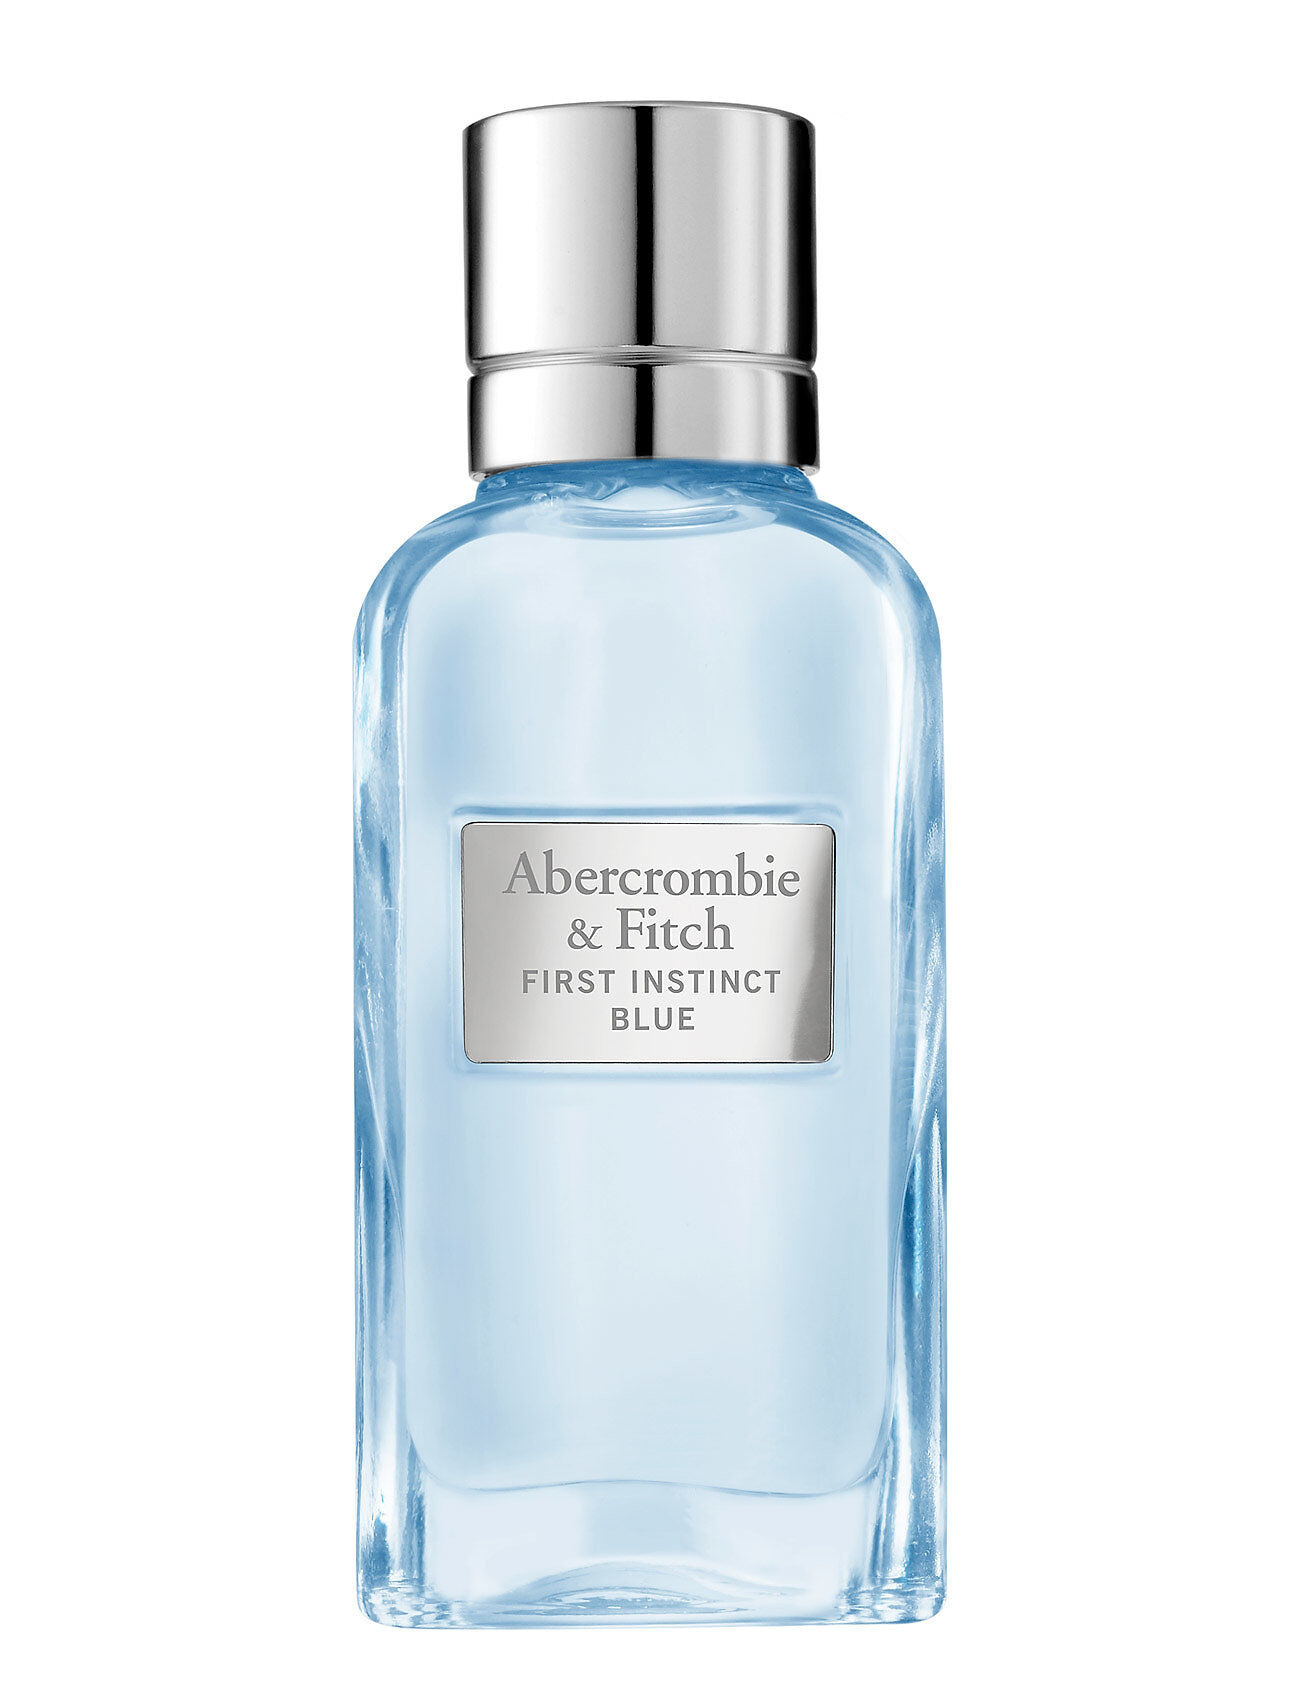 Abercrombie & Fitch First Instinct Blue For Her Eau De Parfum Parfyme Eau De Parfum Nude Abercrombie & Fitch